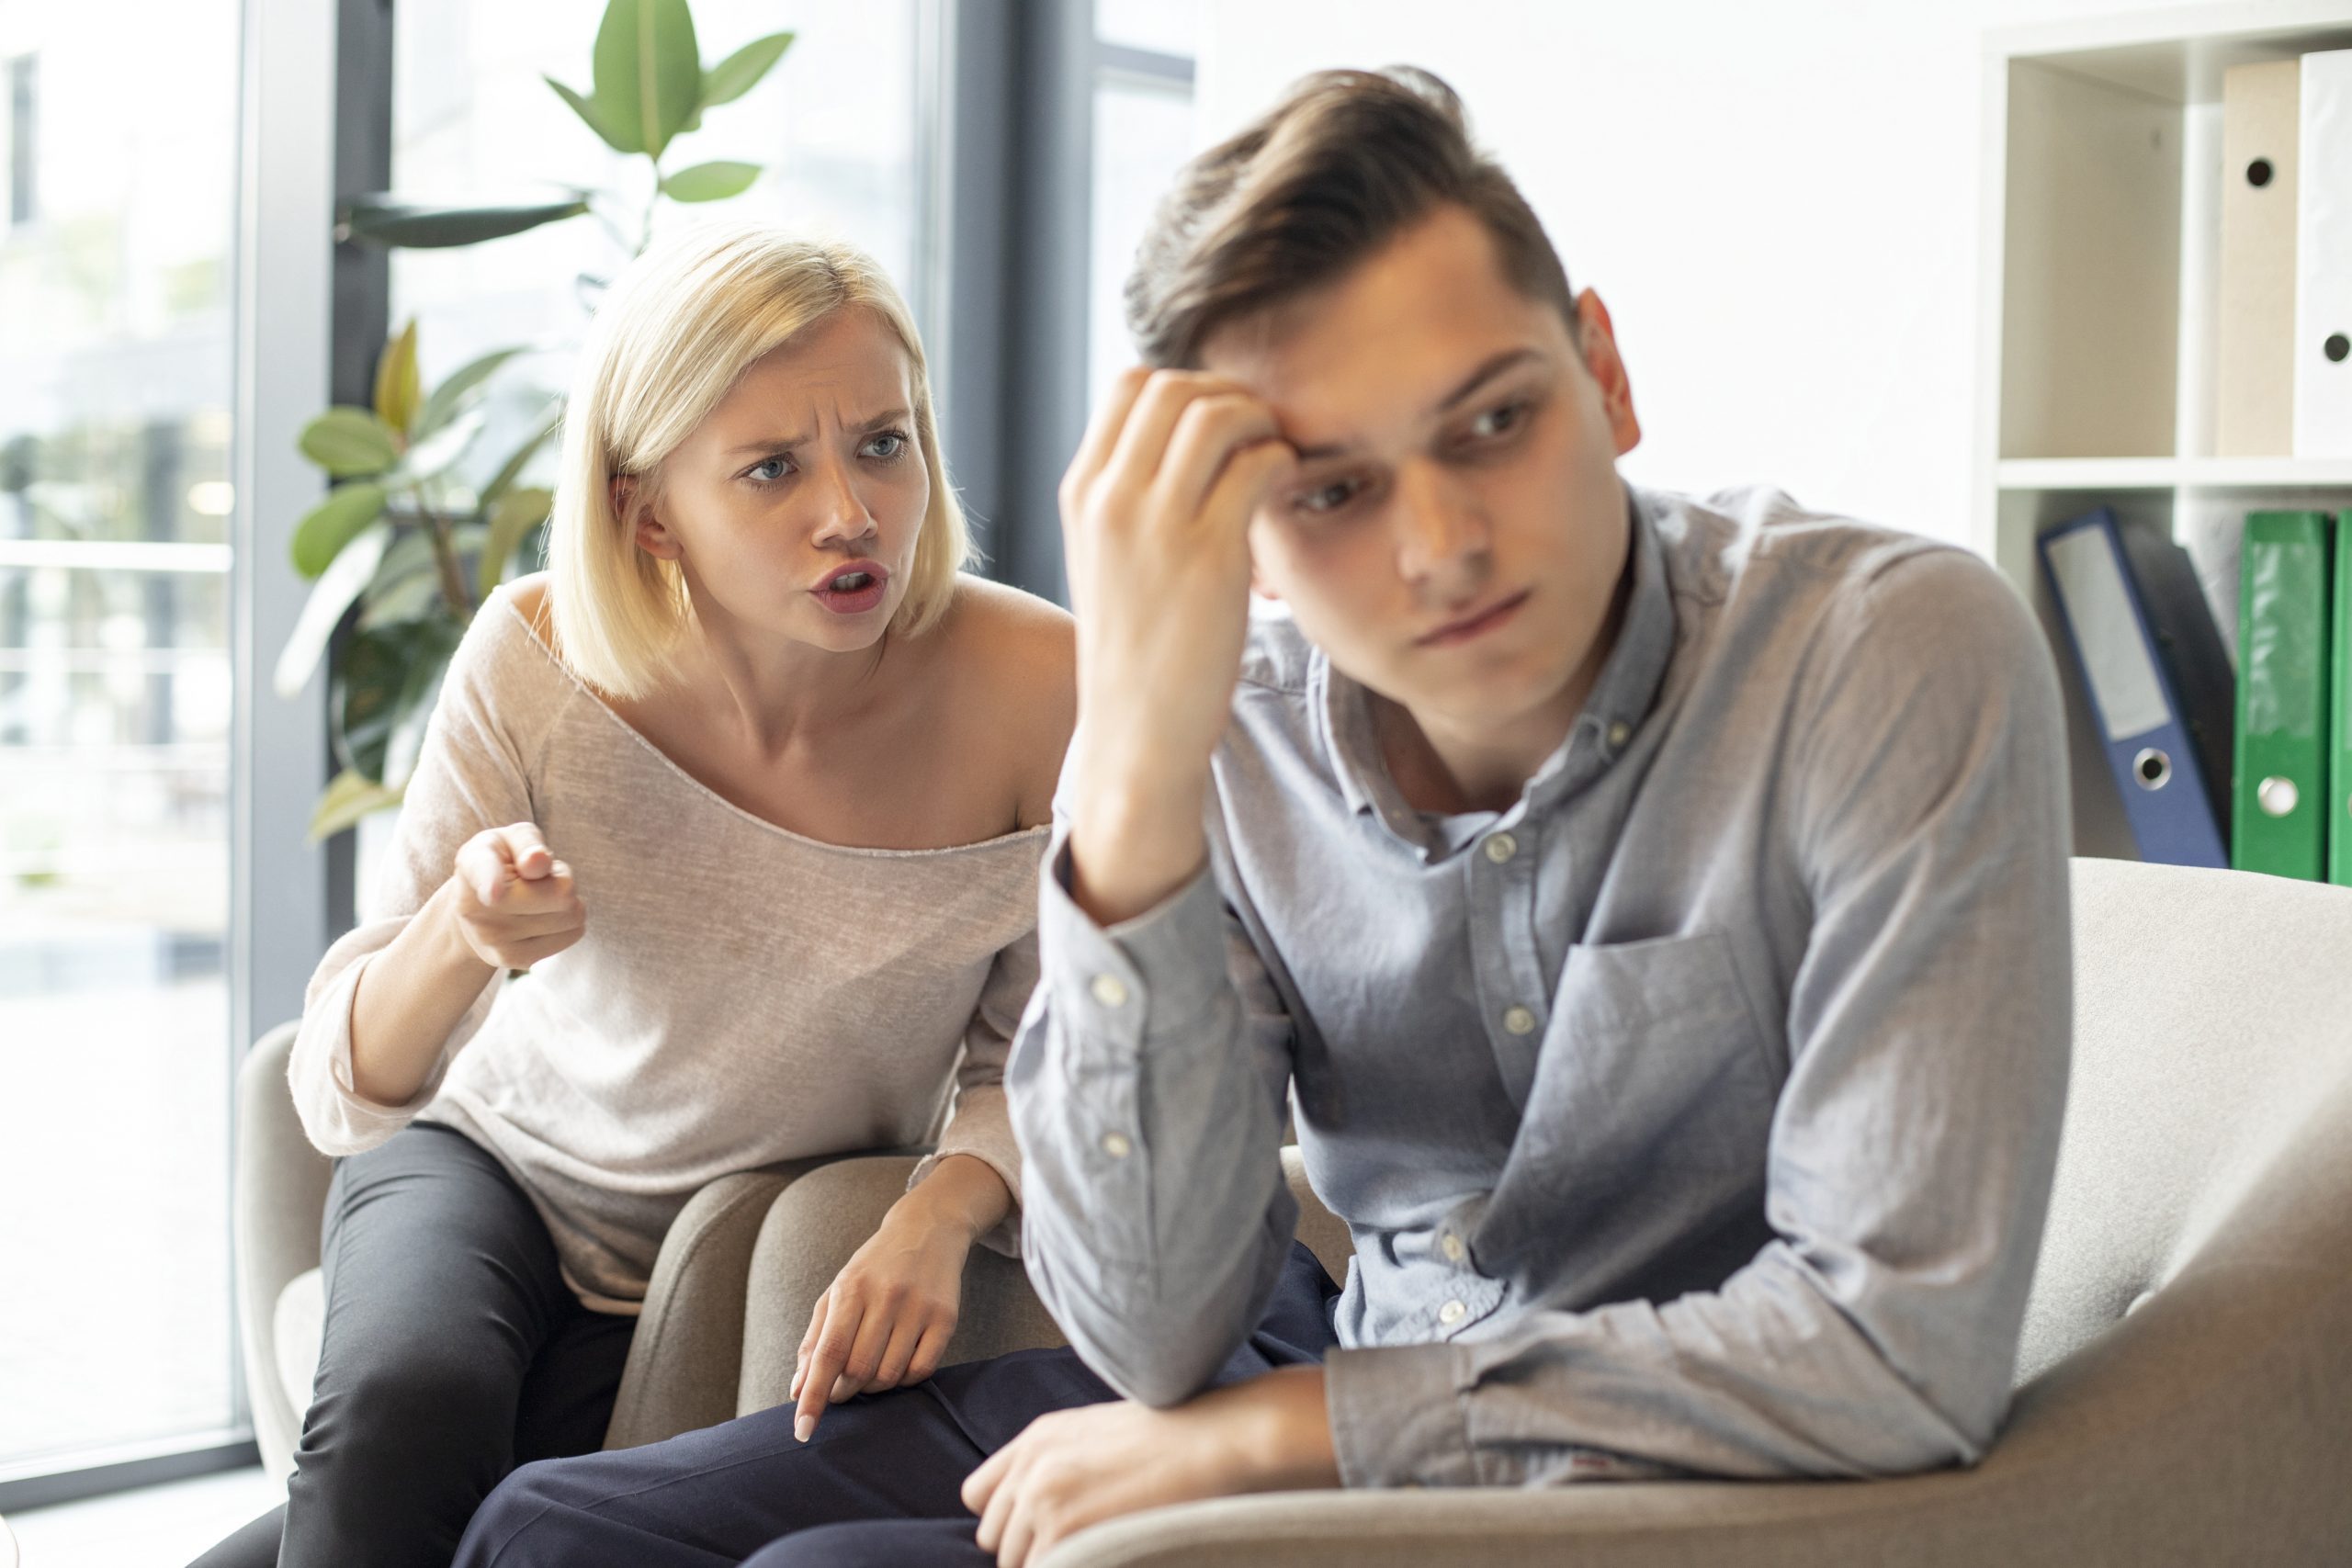 How Do You Control Your Anger In A Relationship?